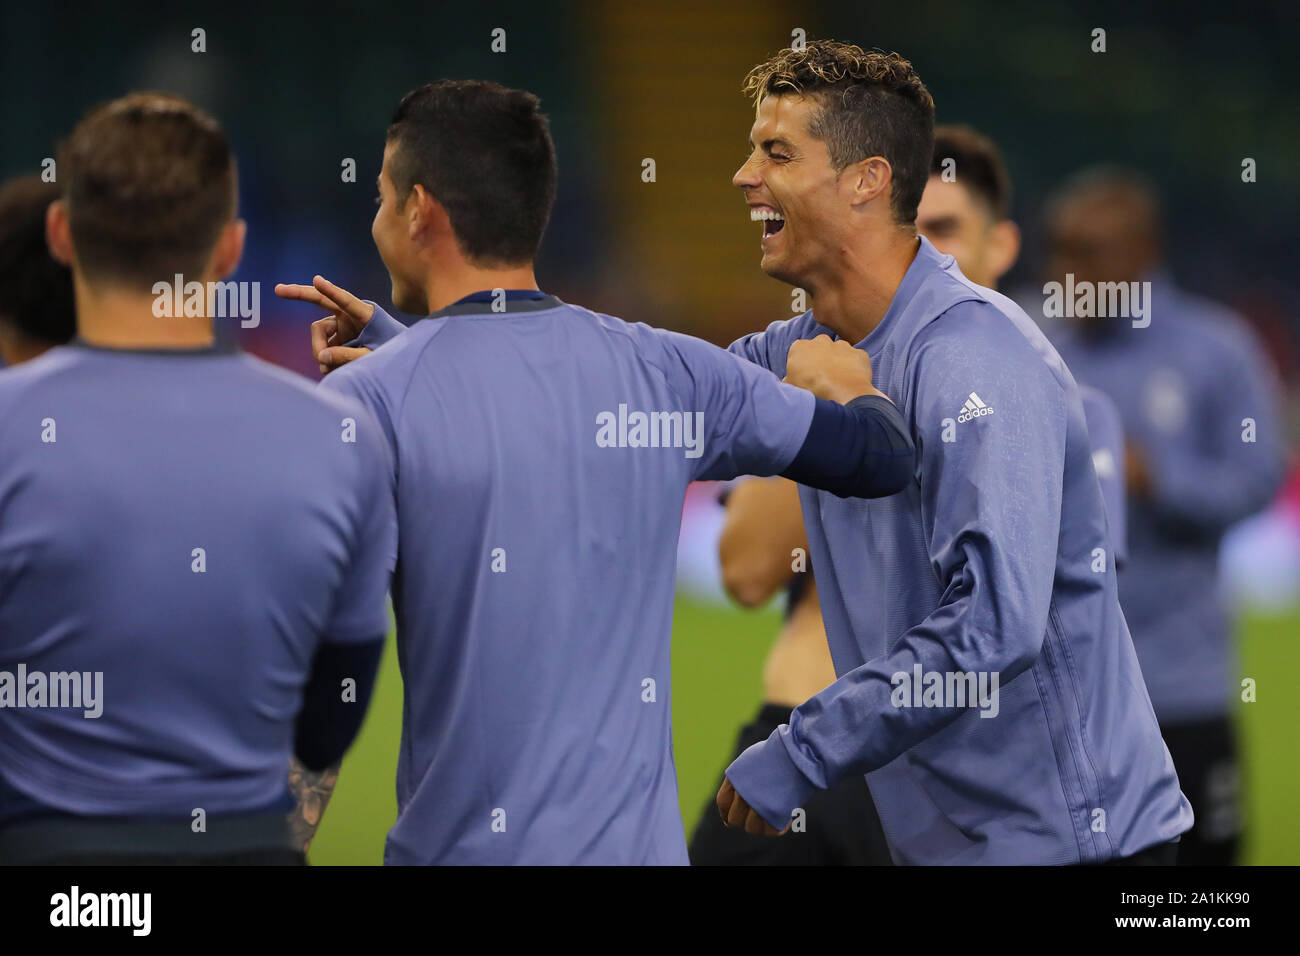 Cristiano Ronaldo of Real Madrid jokes with team mate, James Rodriguez - Real Madrid training ahead of the UEFA Champions League Final, National Stadium of Wales, Cardiff - 2nd June 2017. Stock Photo